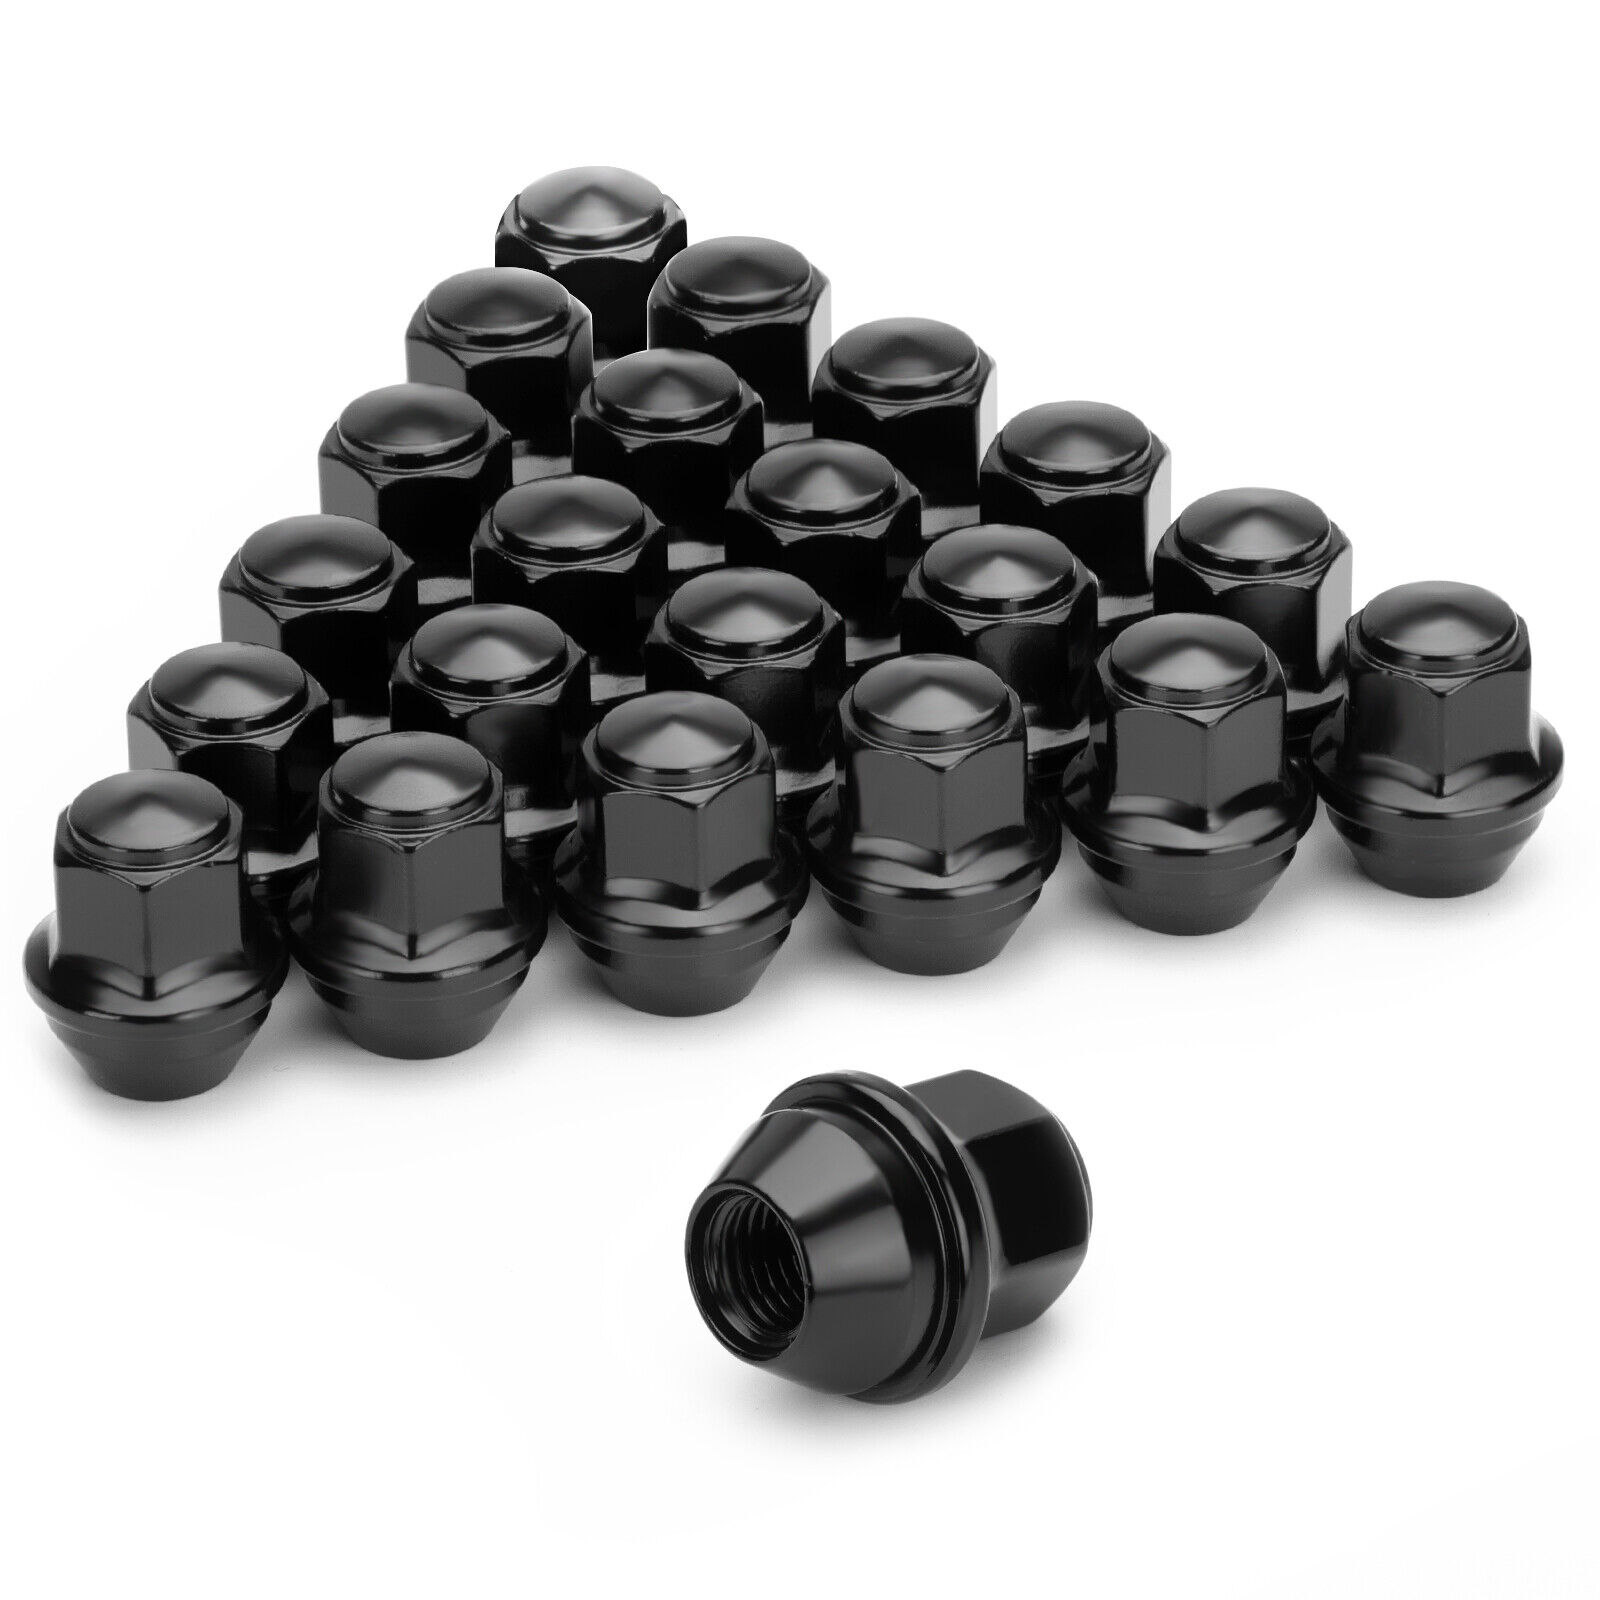 20 12x1.5 19mm Hex OEM Factory Style Acorn FOR Ford Fusion Focus Lug Nuts